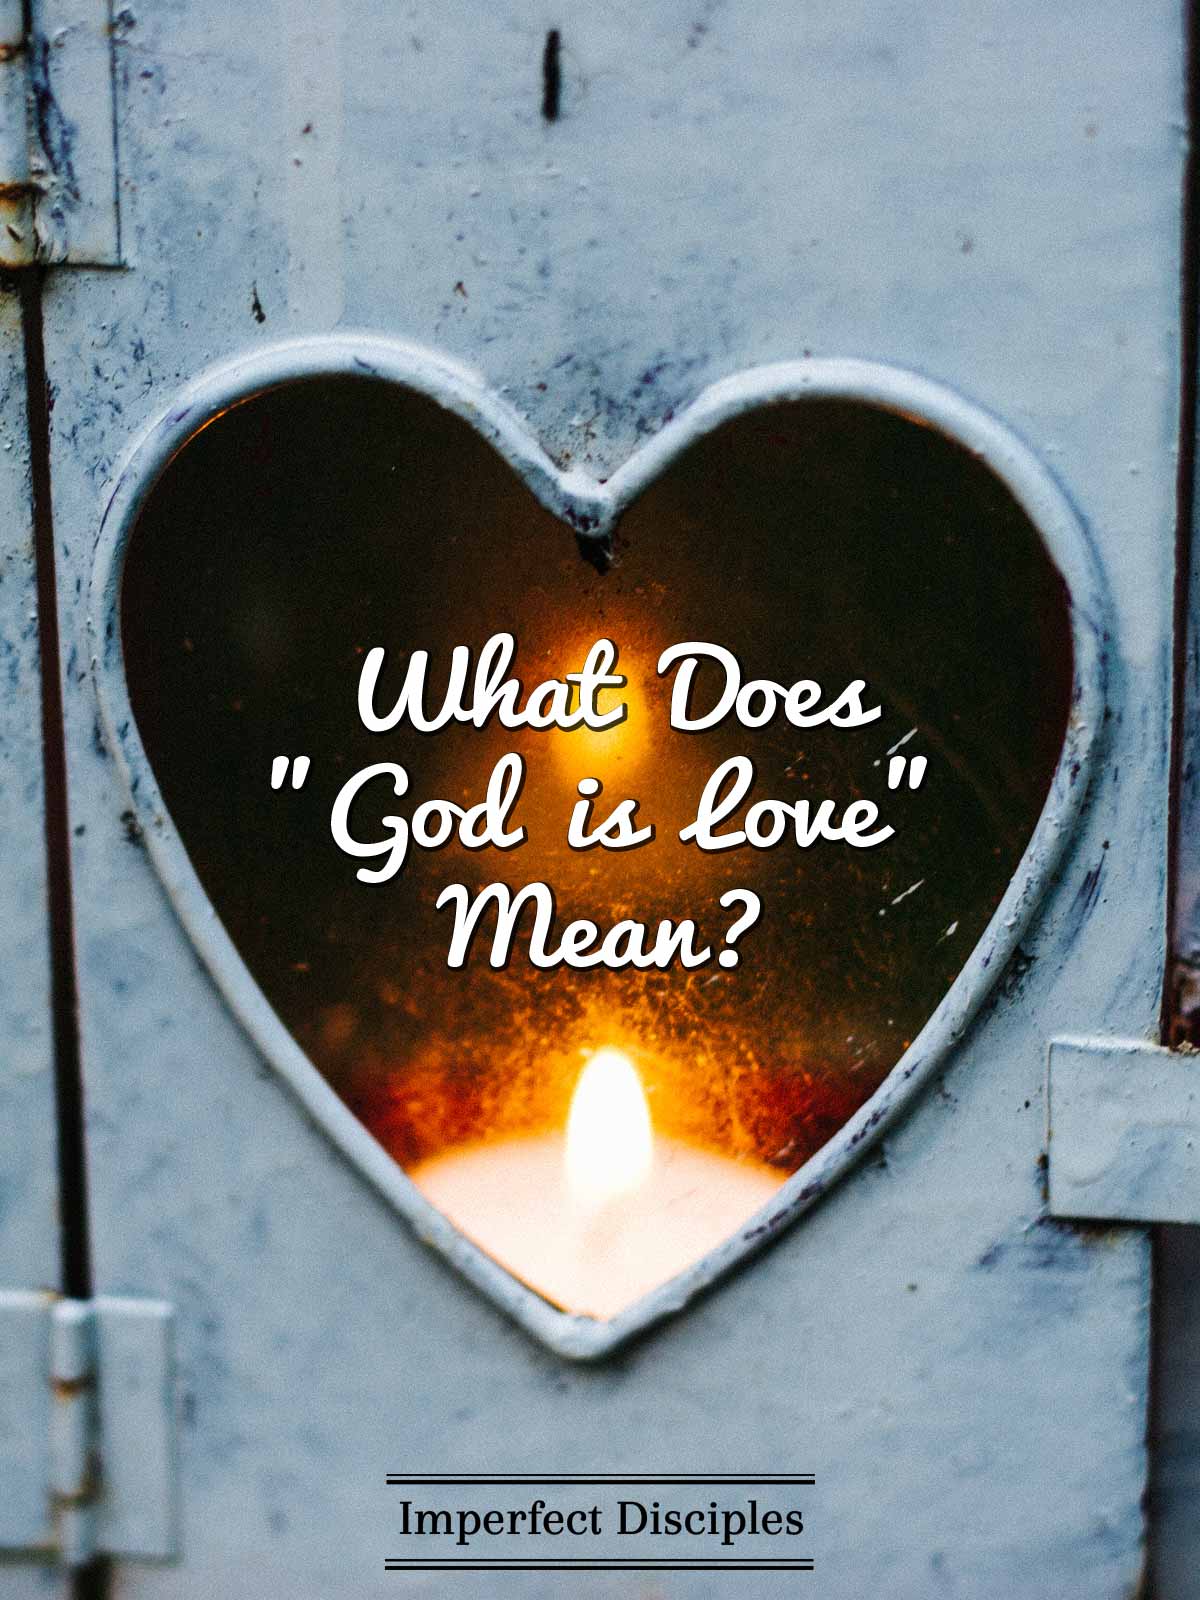 What Does "God is Love" Mean?